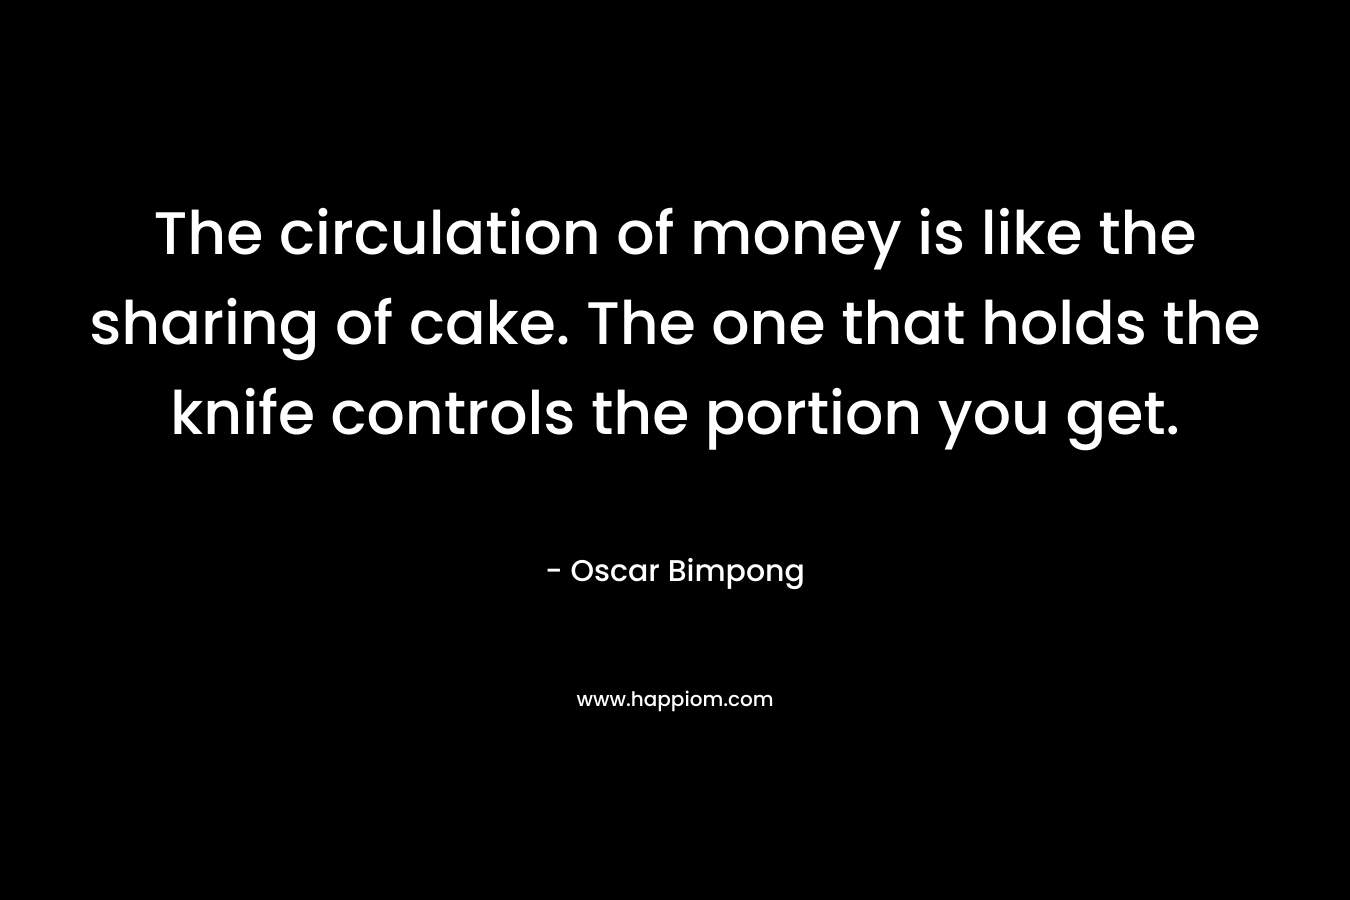 The circulation of money is like the sharing of cake. The one that holds the knife controls the portion you get.